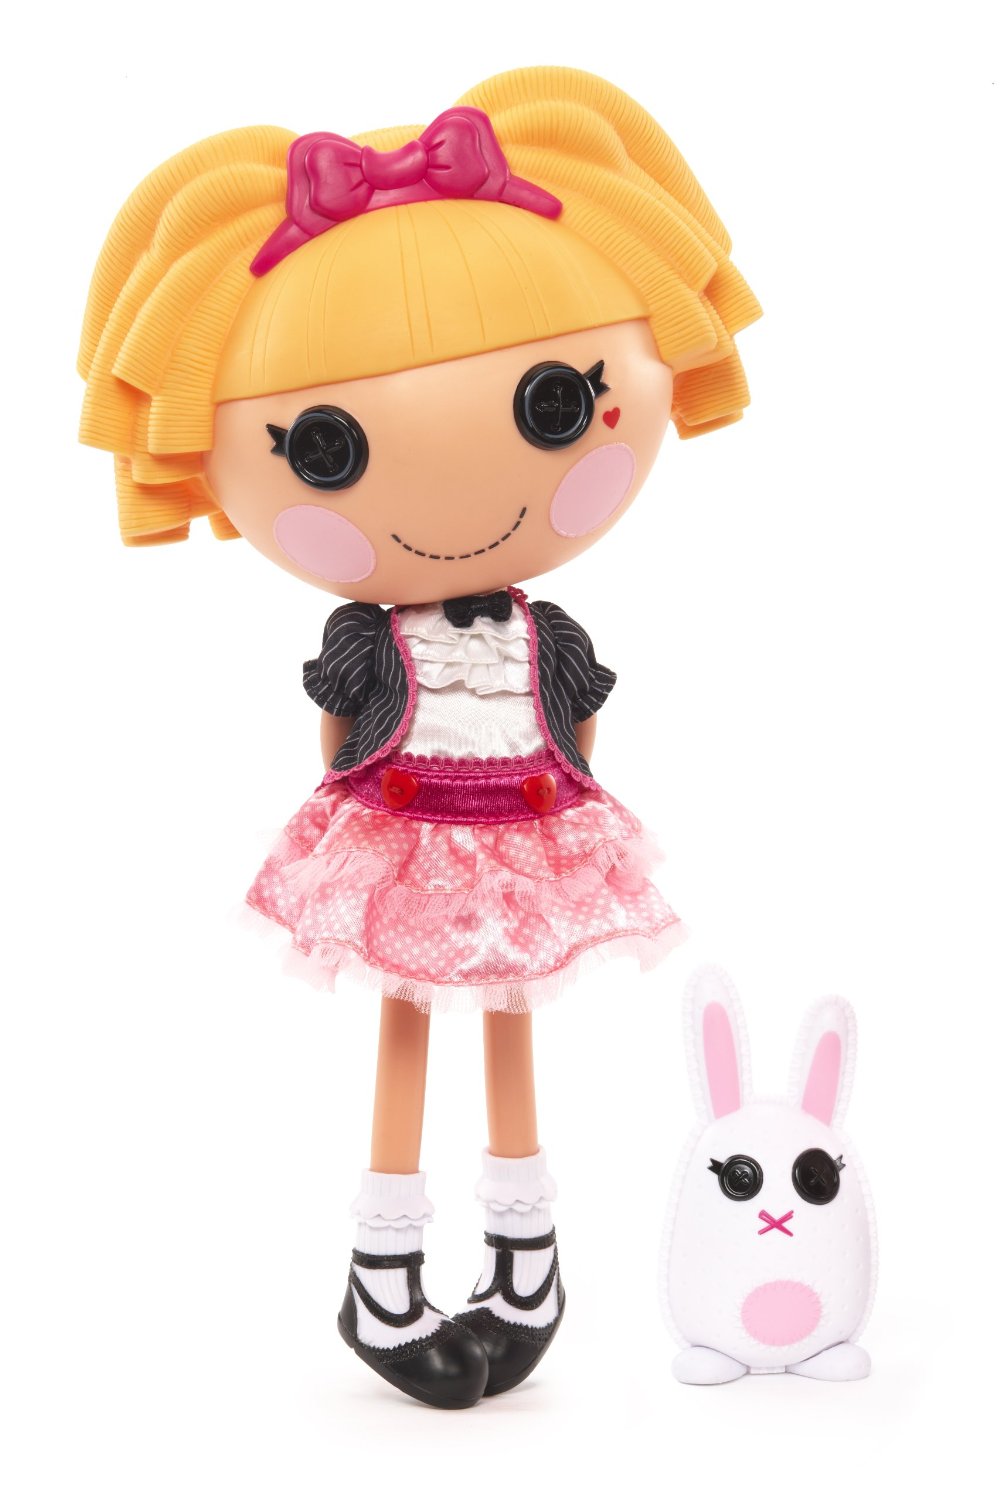 https://static.wikia.nocookie.net/lalaloopsyland/images/0/07/Lalaloopsy_-_Misty_Mysterious.jpg/revision/latest?cb=20130401050139